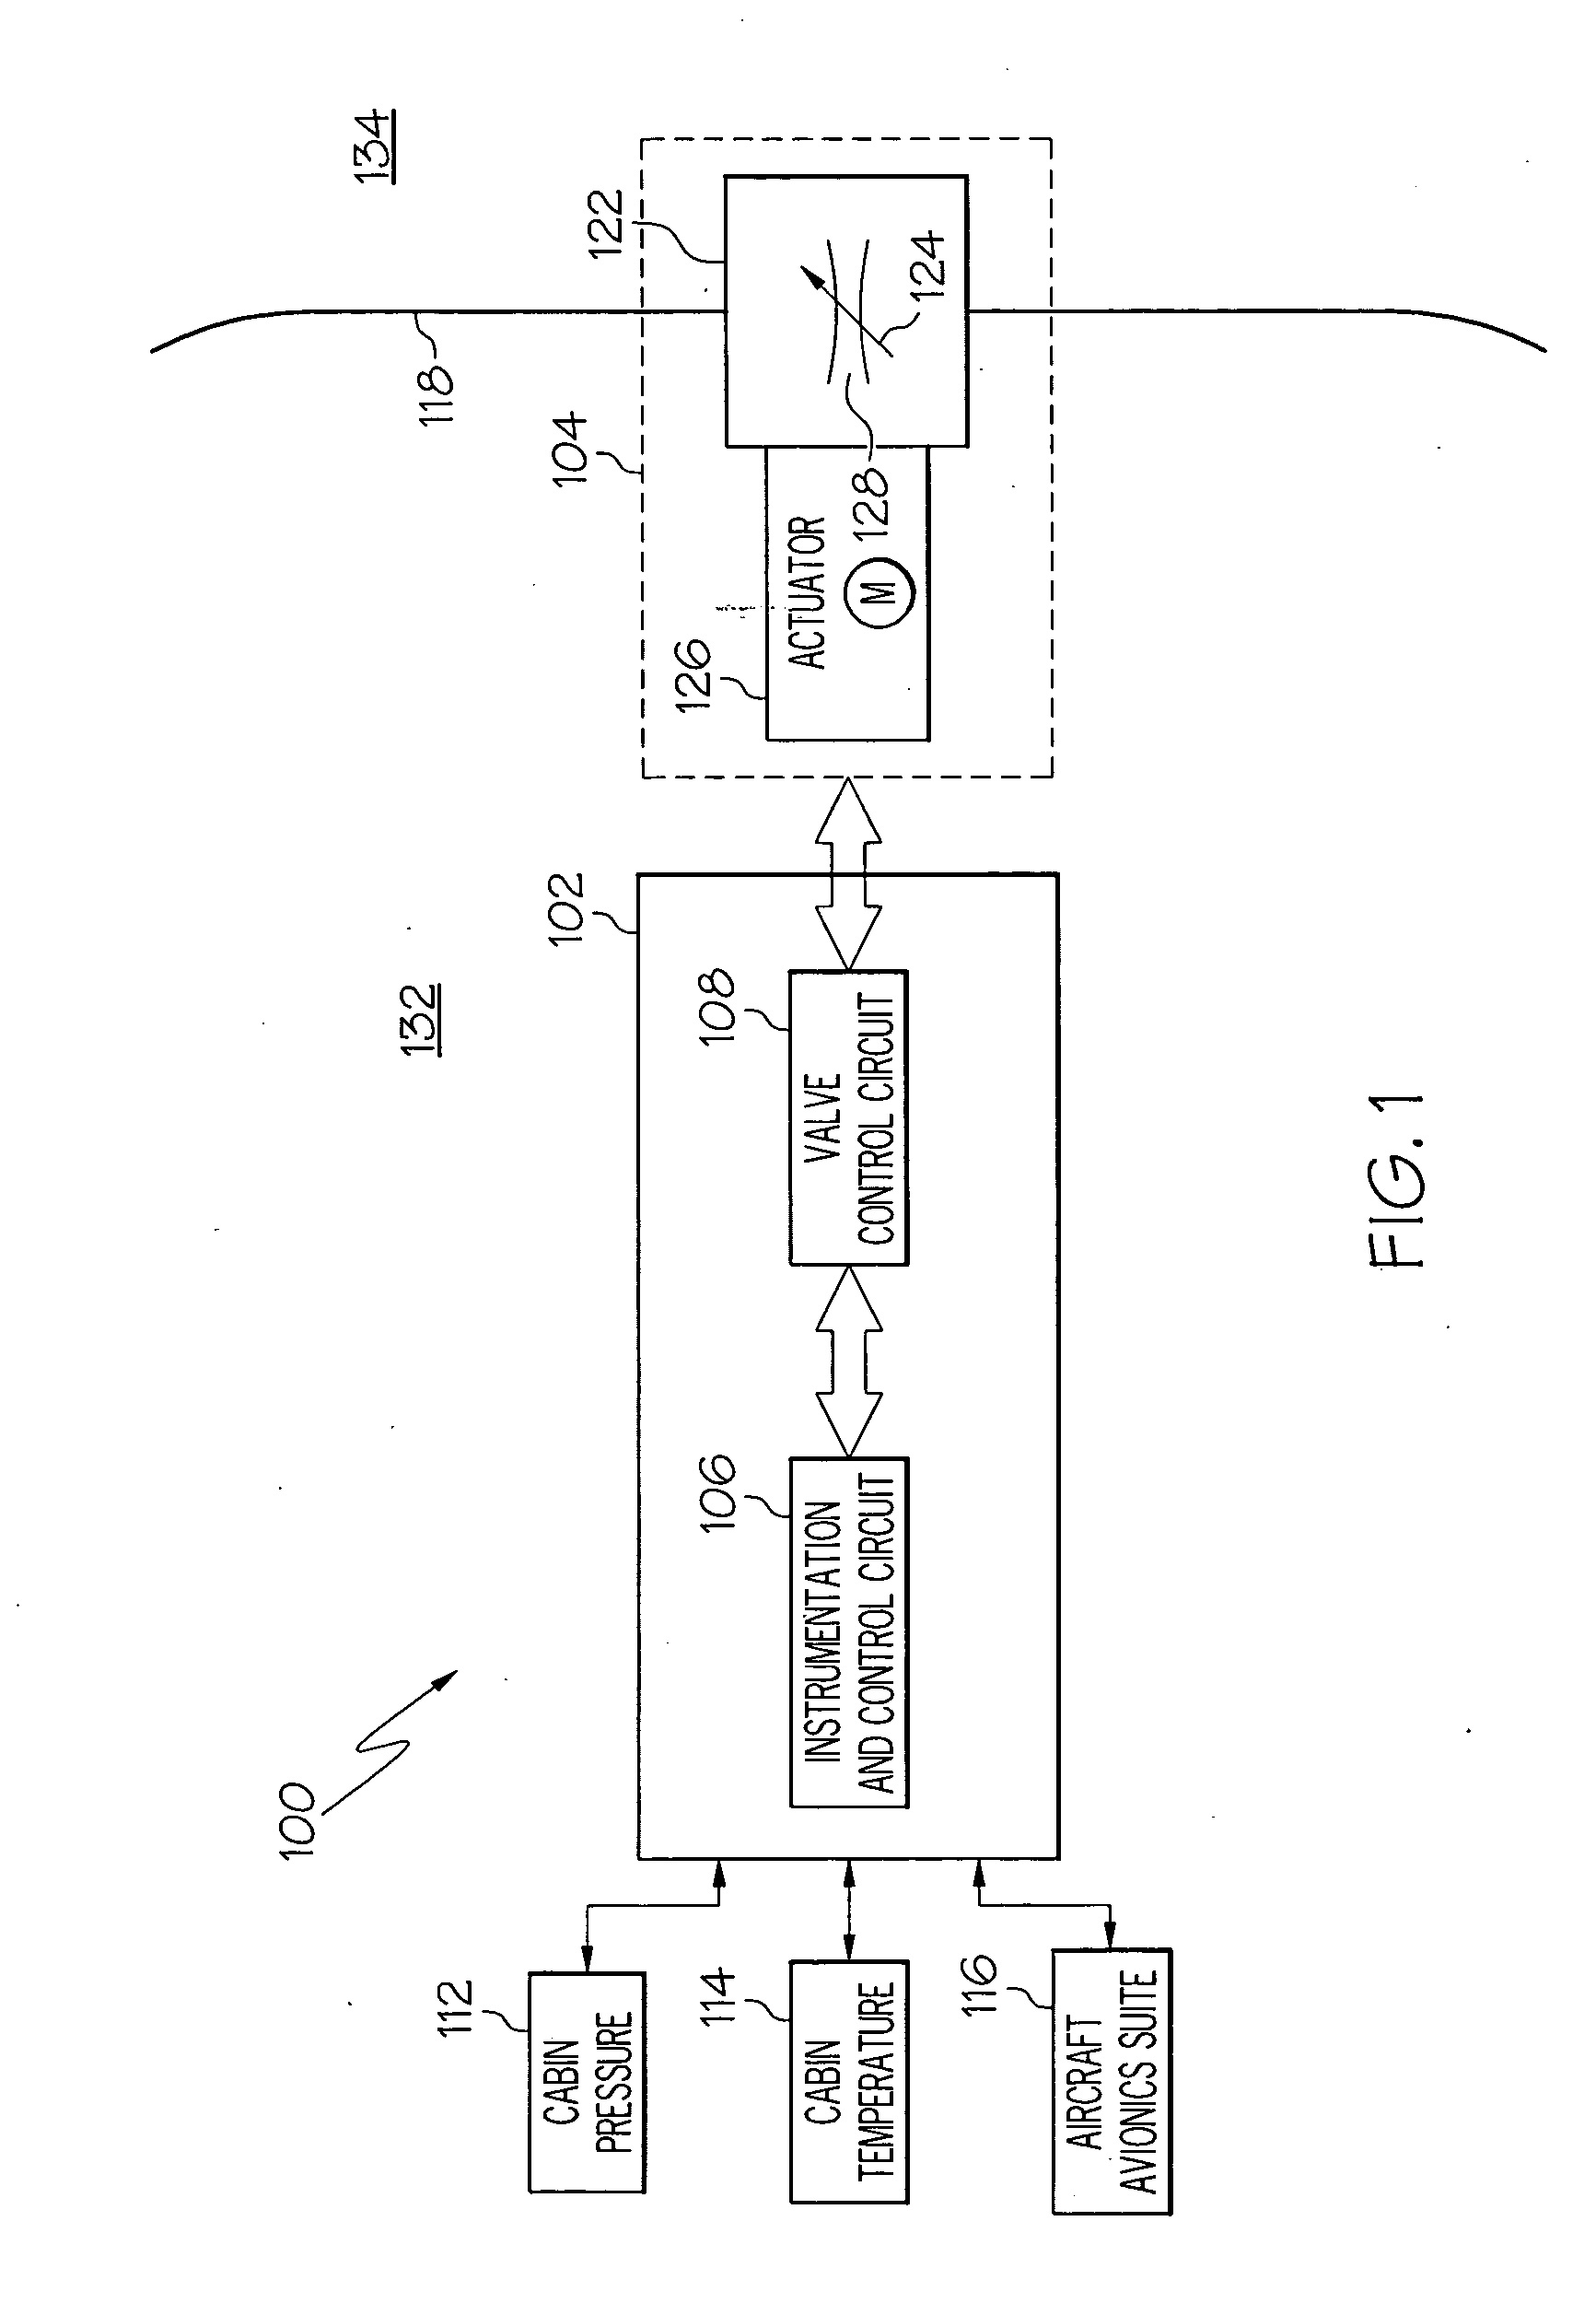 Cabin pressure control system and method that implements high-speed sampling and averaging techniques to compute cabin pressure rate of change